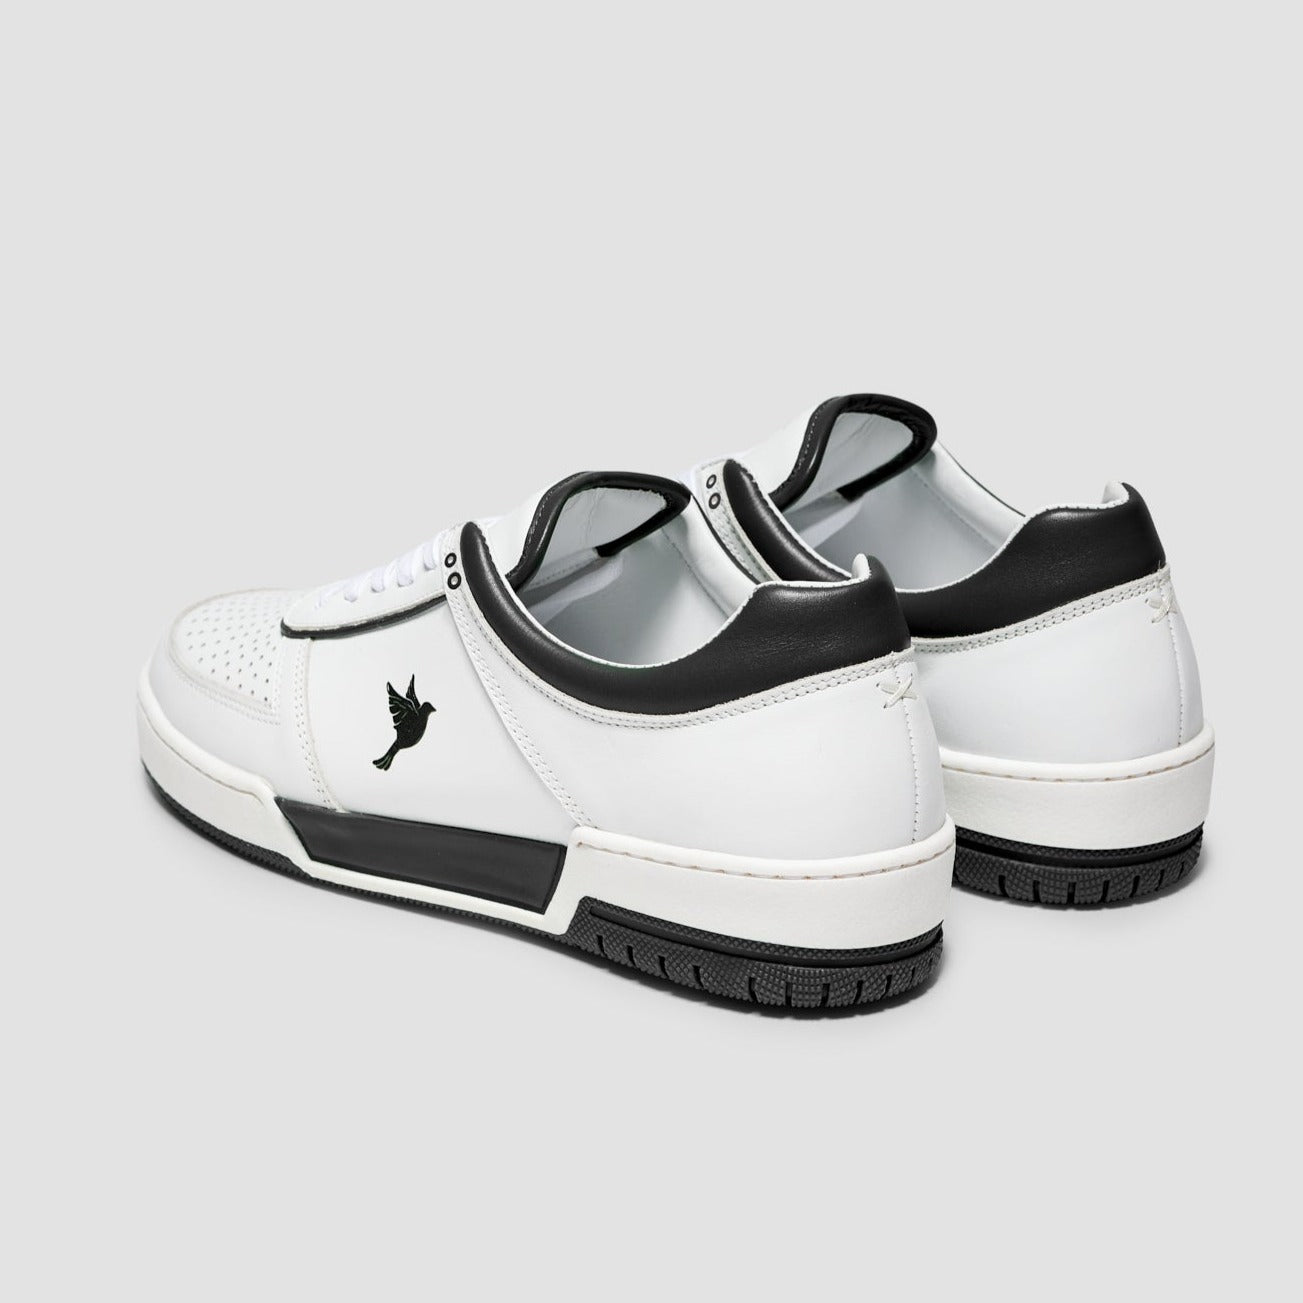 Sustainable sneakers made of durable with black and white color accents, showcasing a 3D-printed dove emblem on the side.